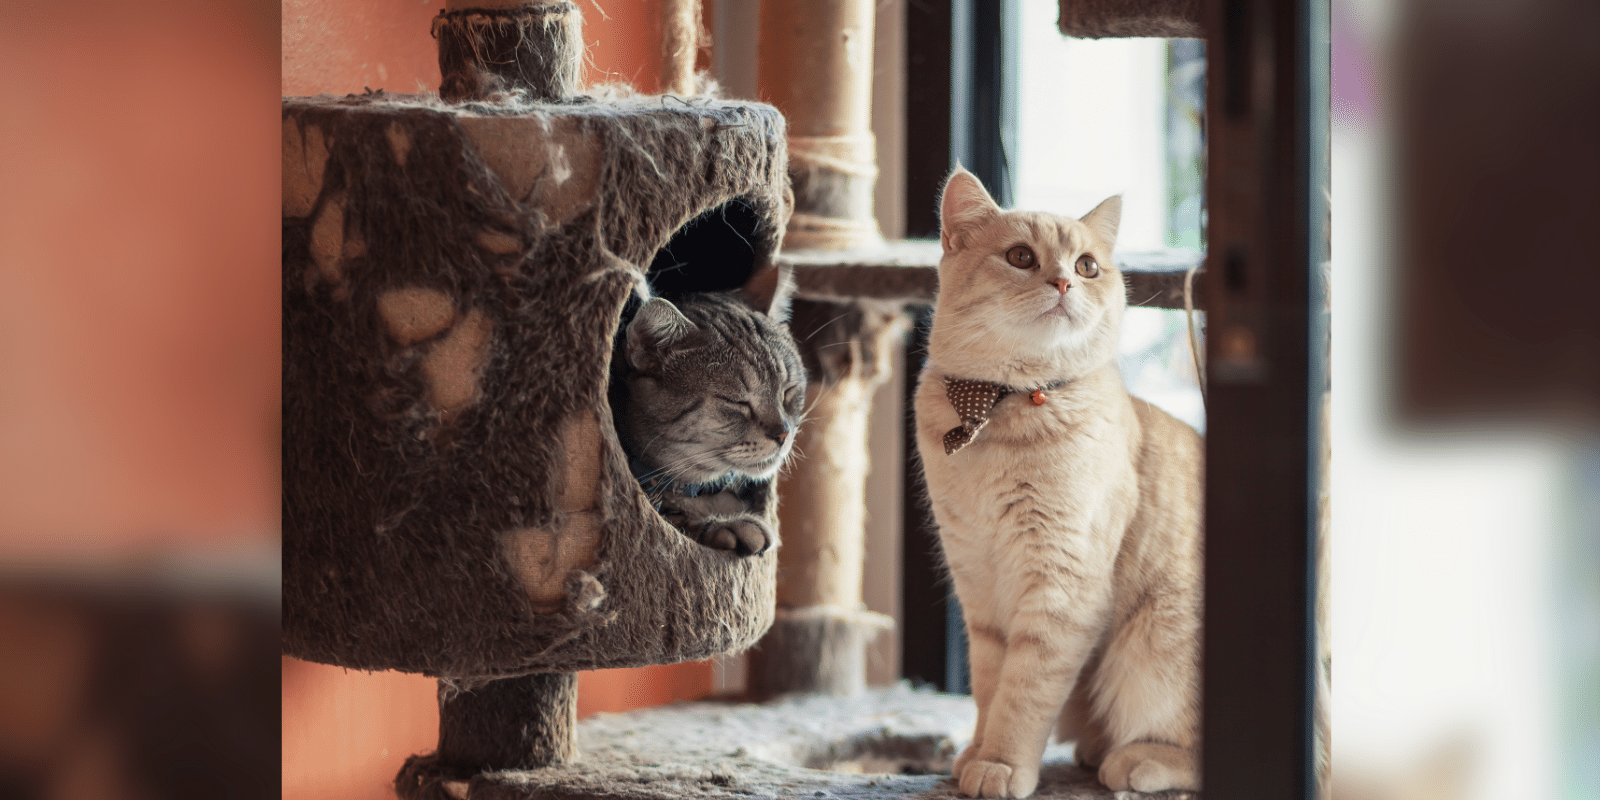 Two cats at a cat cafe on cat tree. Gray cat in tree "limb", orange cat sitting to the side